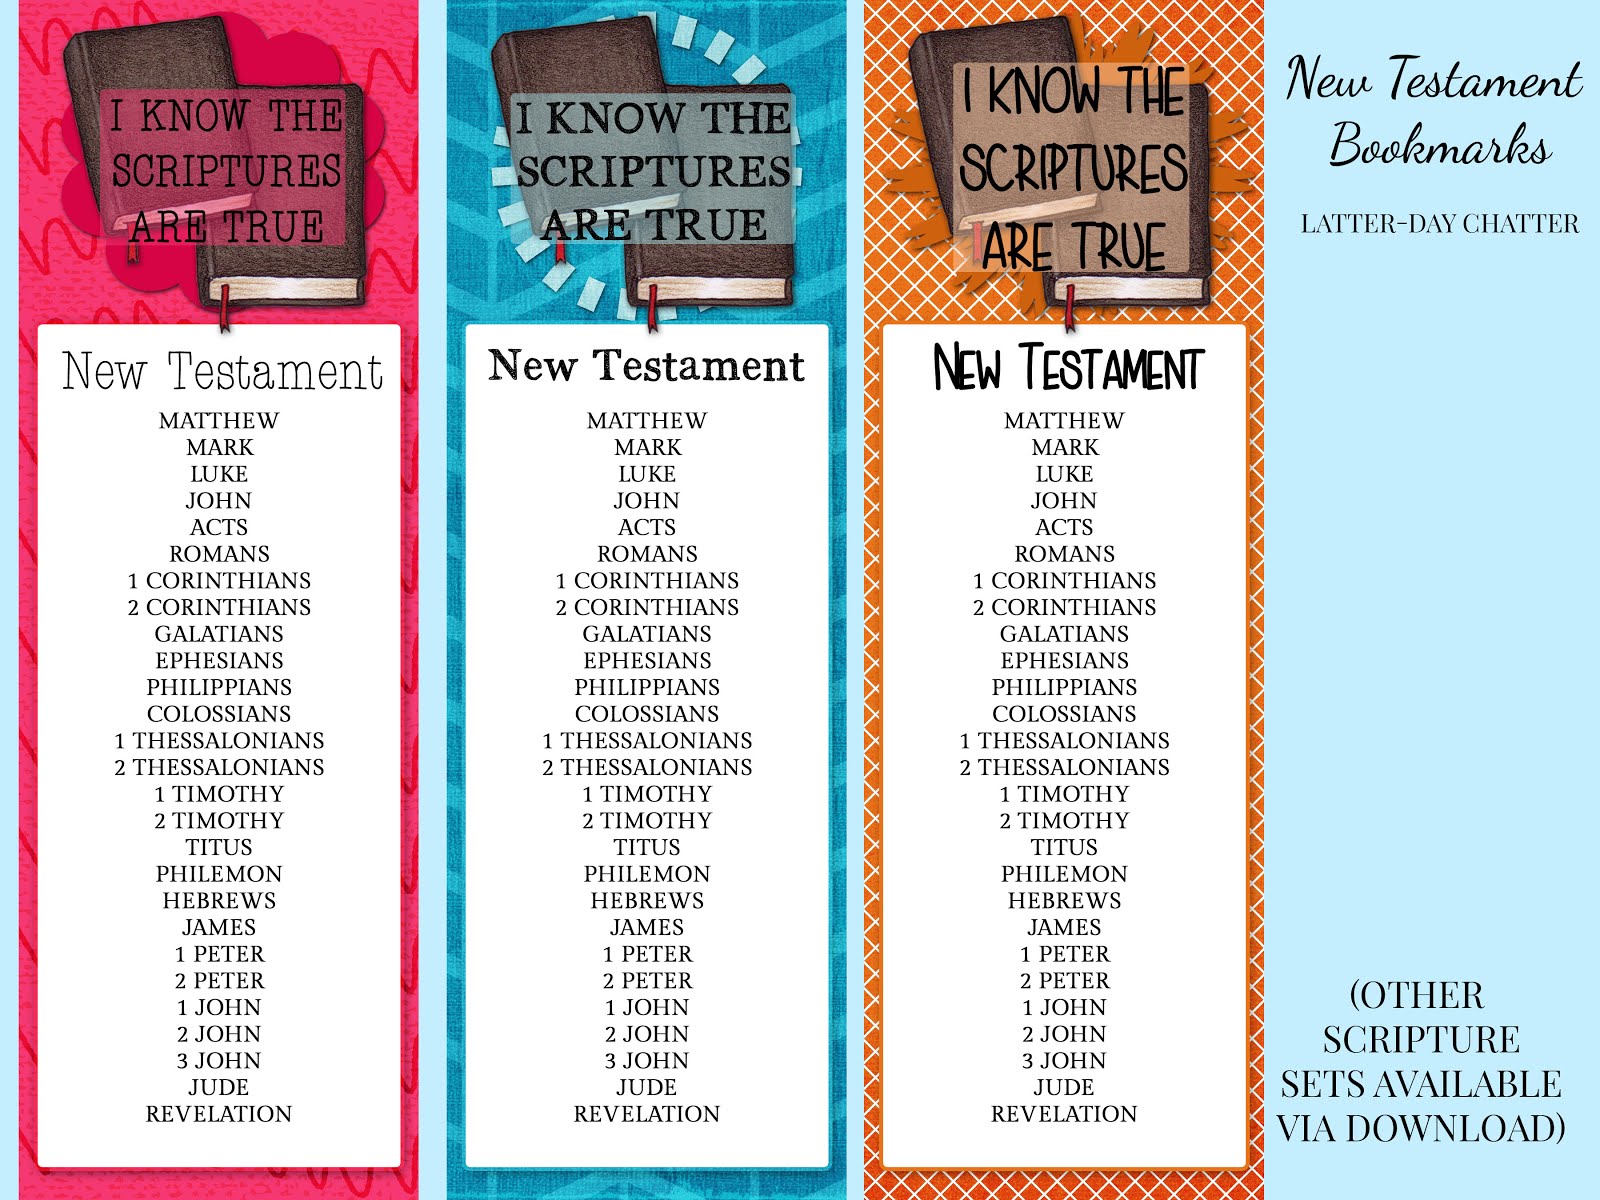 latter-day-chatter-scripture-books-bookmarks